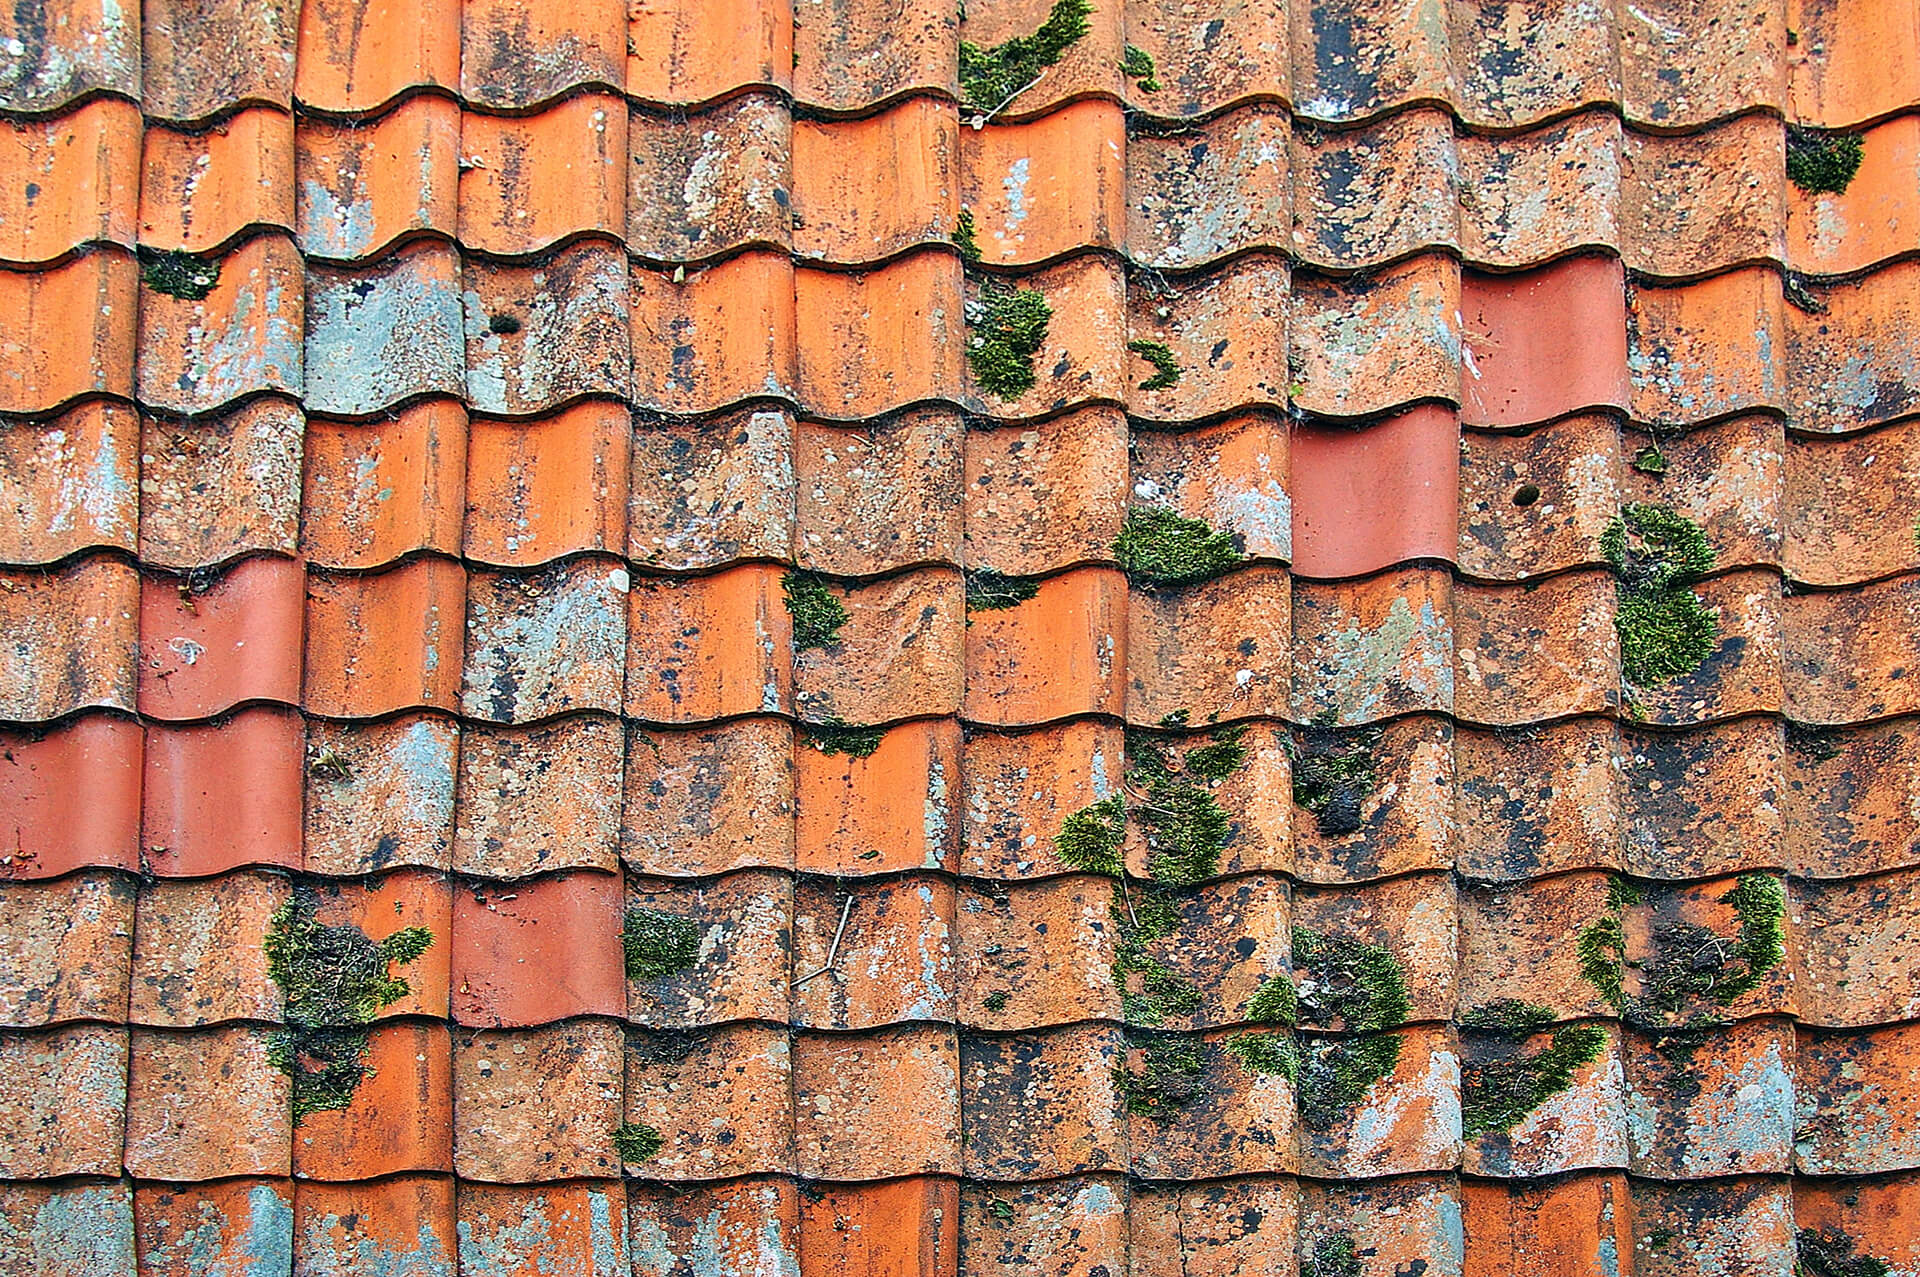 Don’t Avoid Old Roofs – Be Safe When Working on Them!